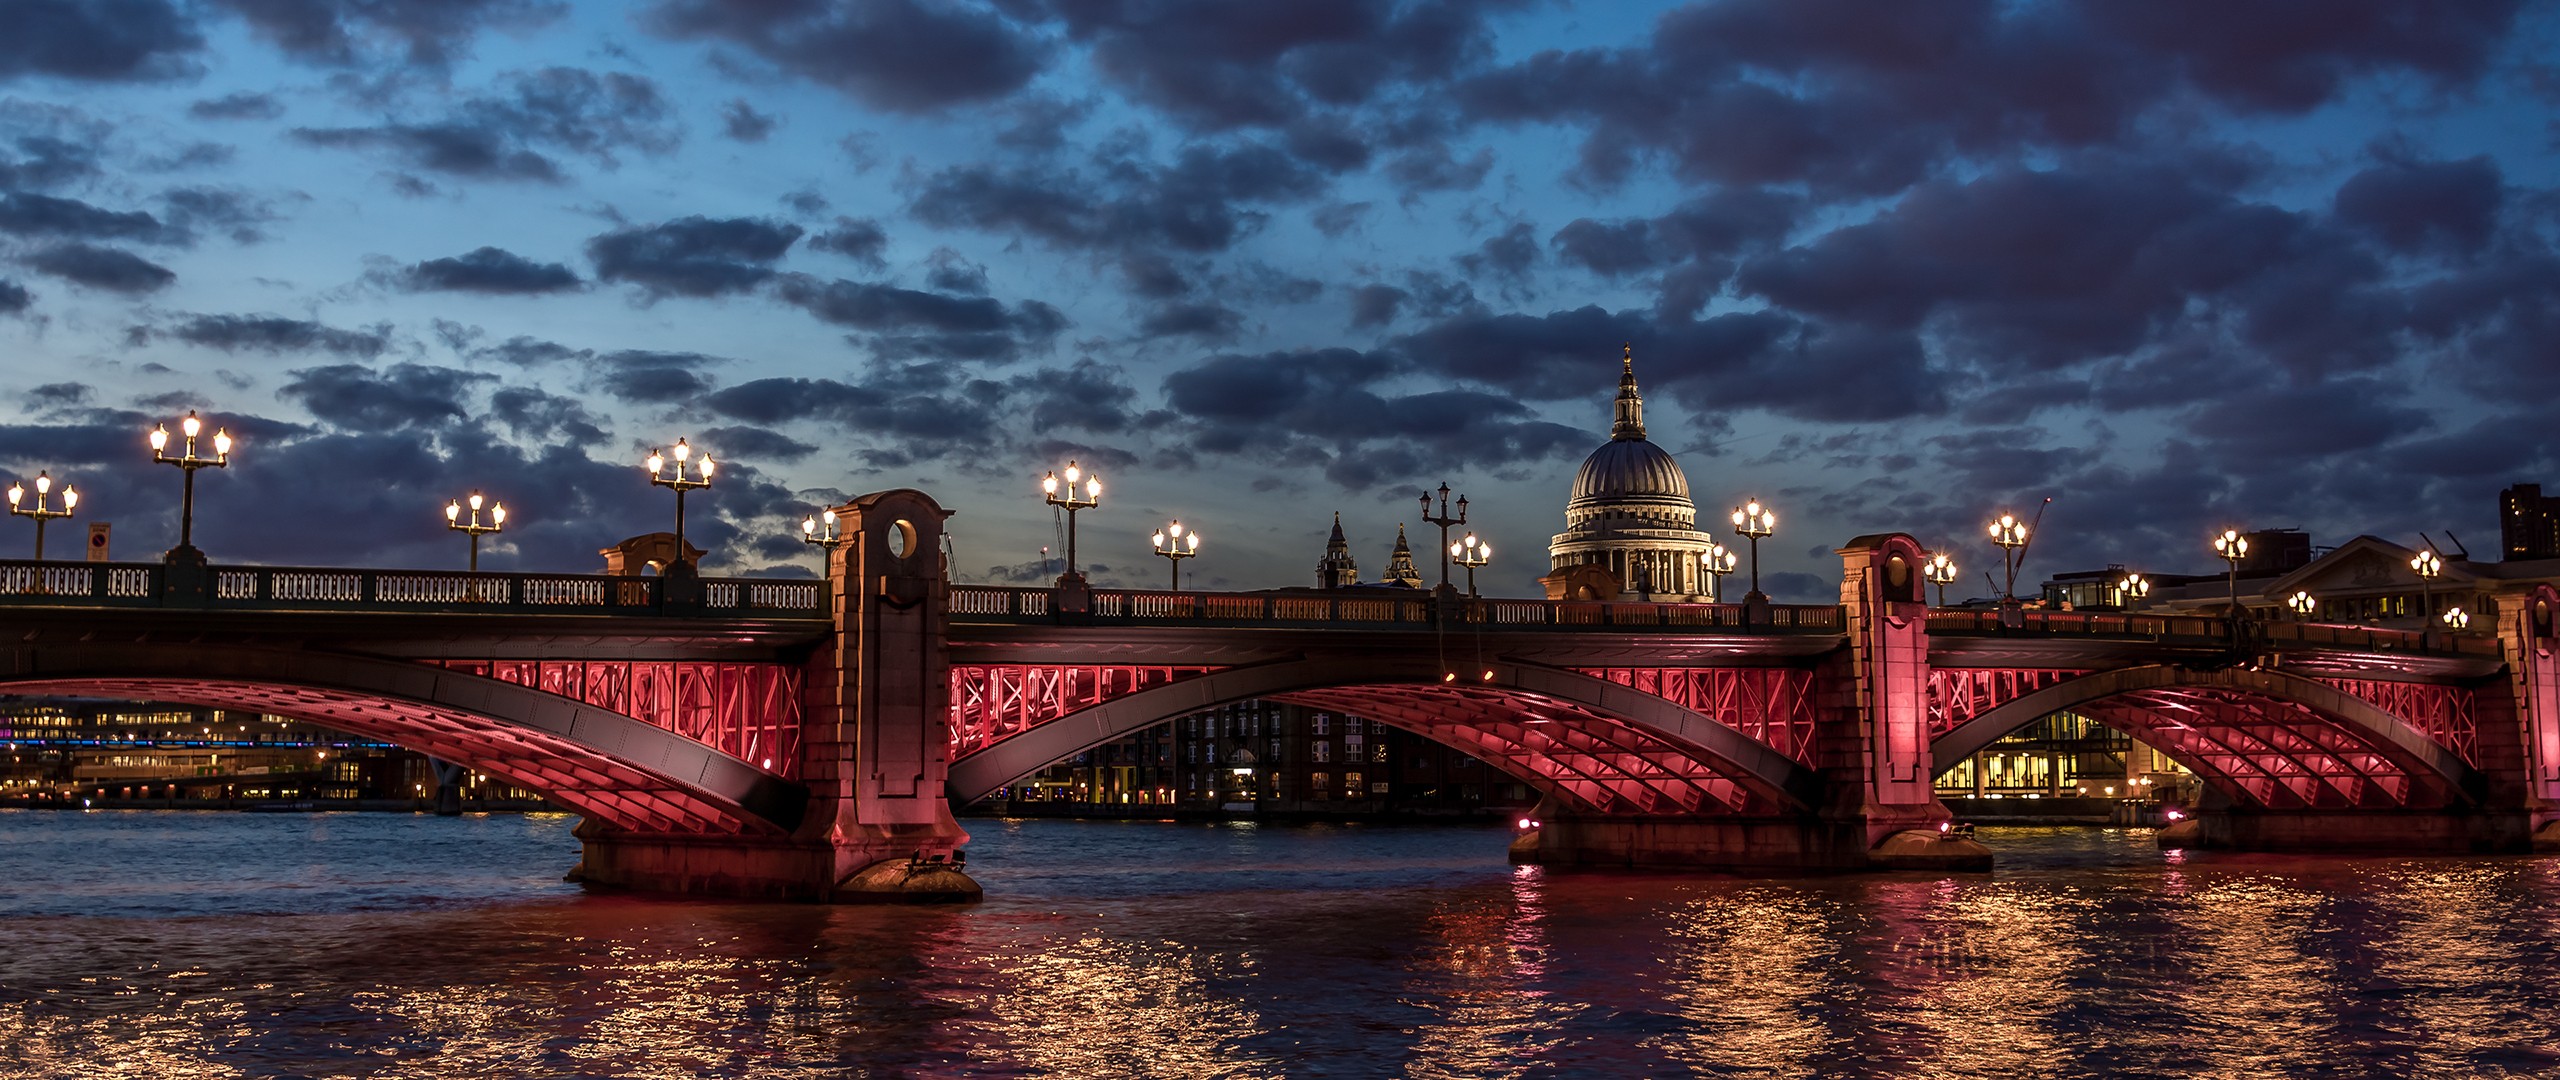 Free photo Wallpaper with night bridge over the river